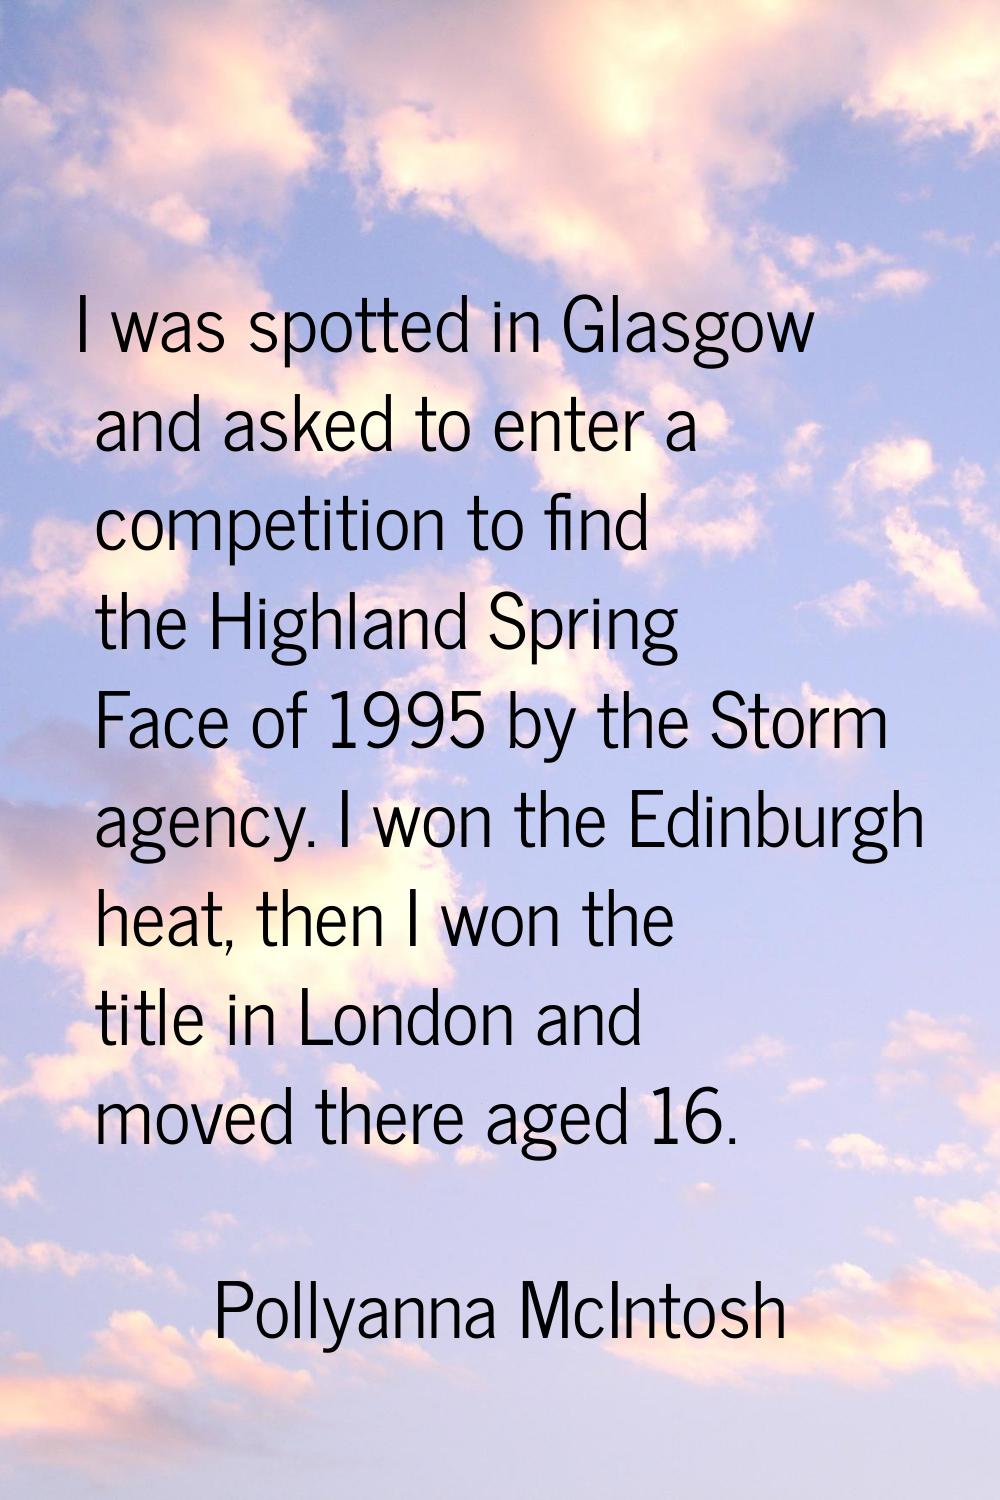 I was spotted in Glasgow and asked to enter a competition to find the Highland Spring Face of 1995 